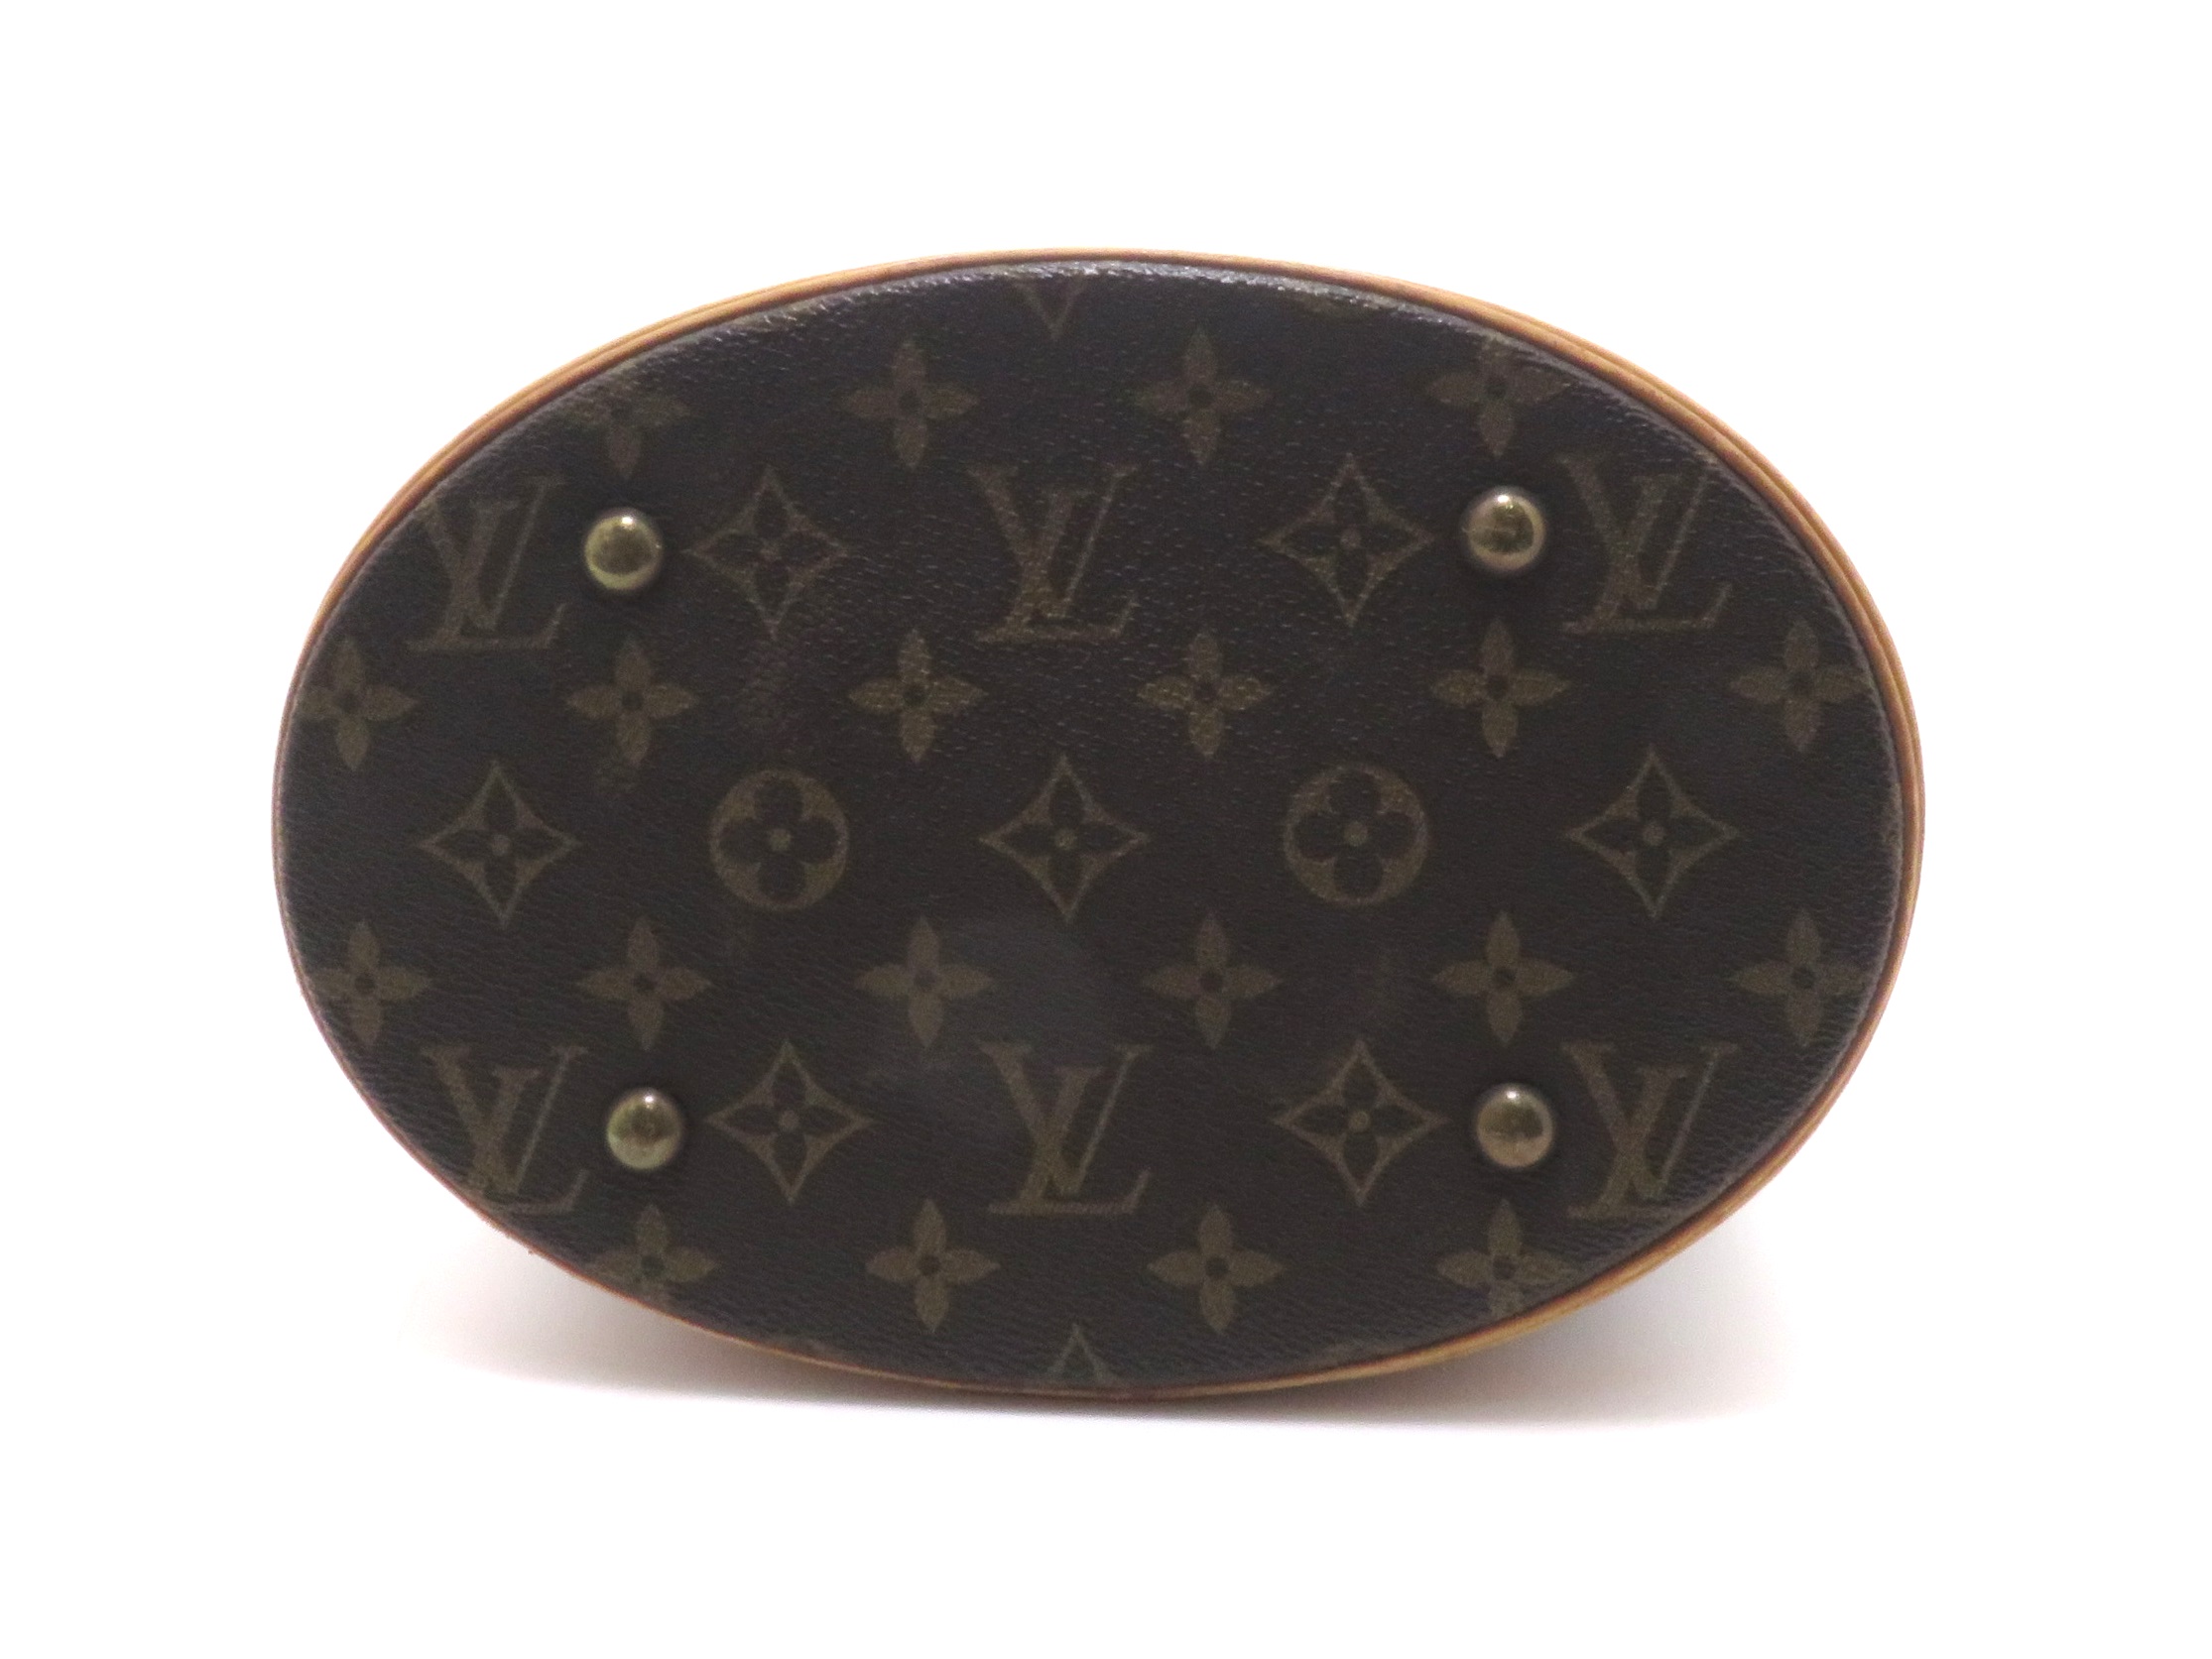 LOUIS VUITTON ルイヴィトン バケット23 トートバッグ モノグラム